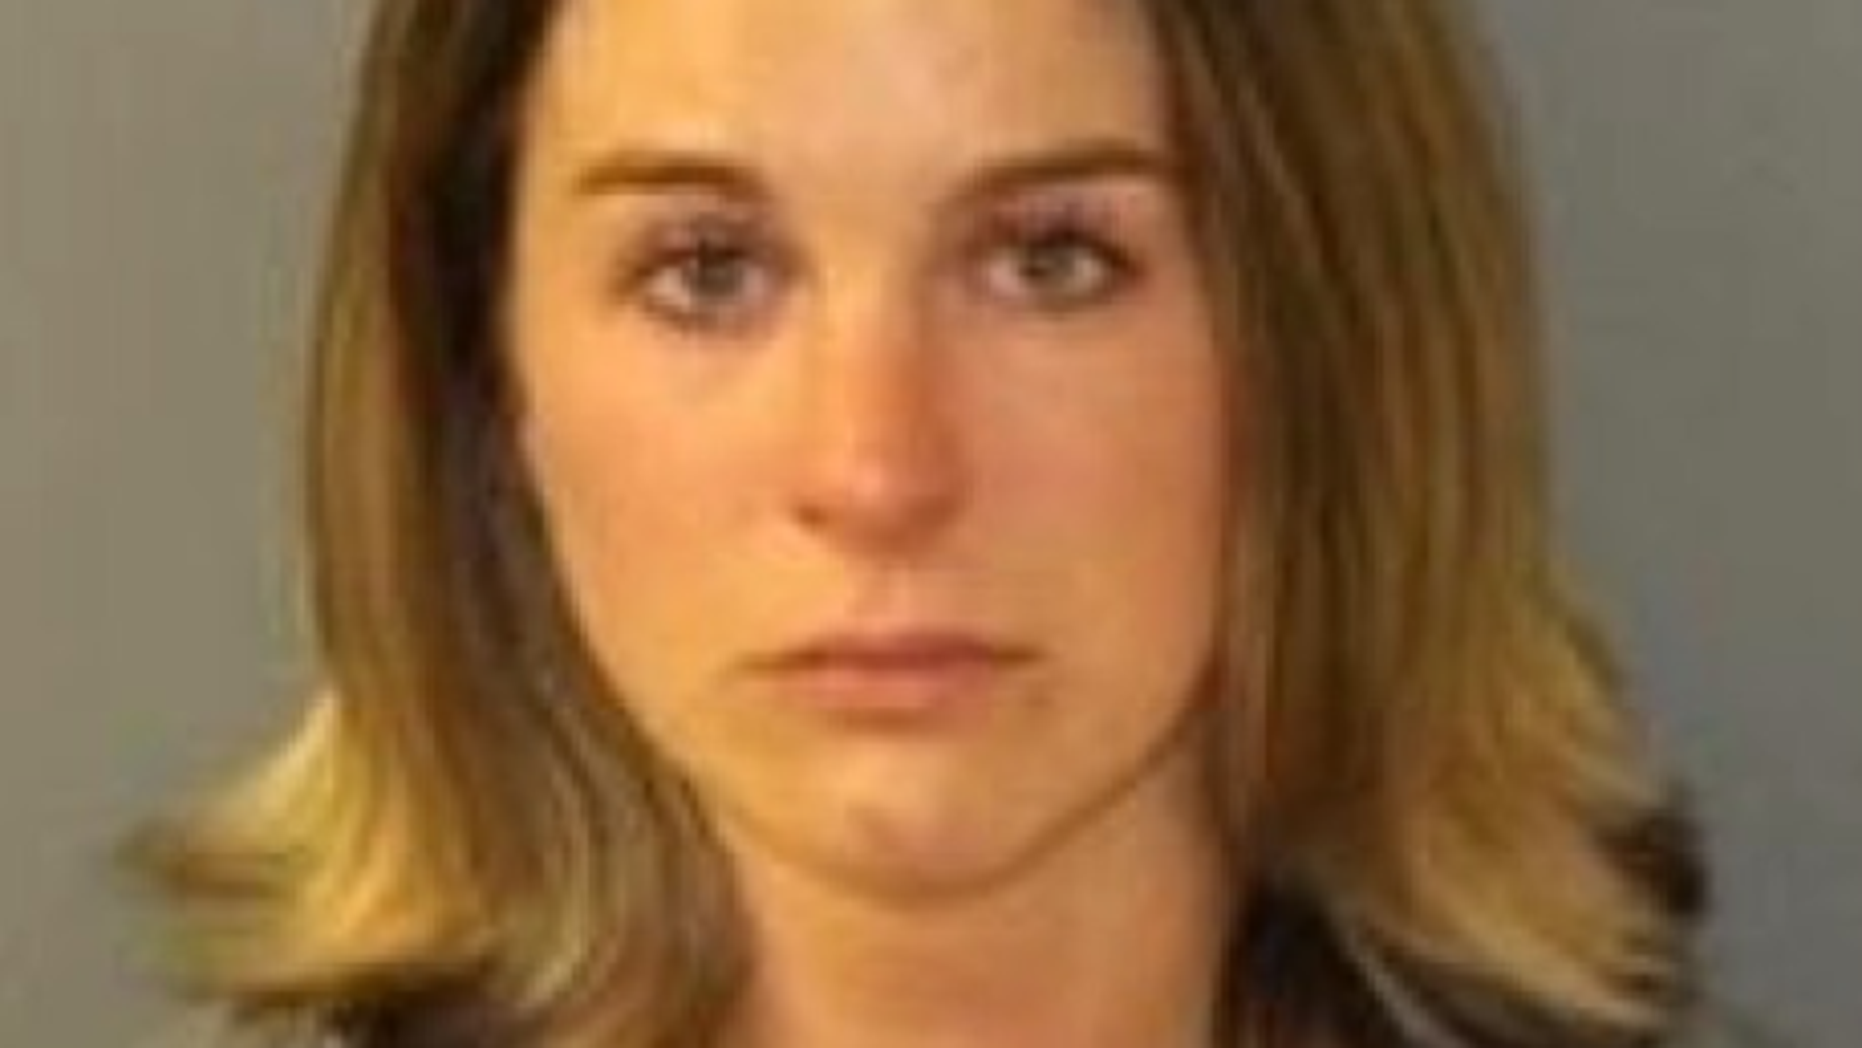 30 Year Women Porn - Virginia woman gets 40 years for producing child porn ...